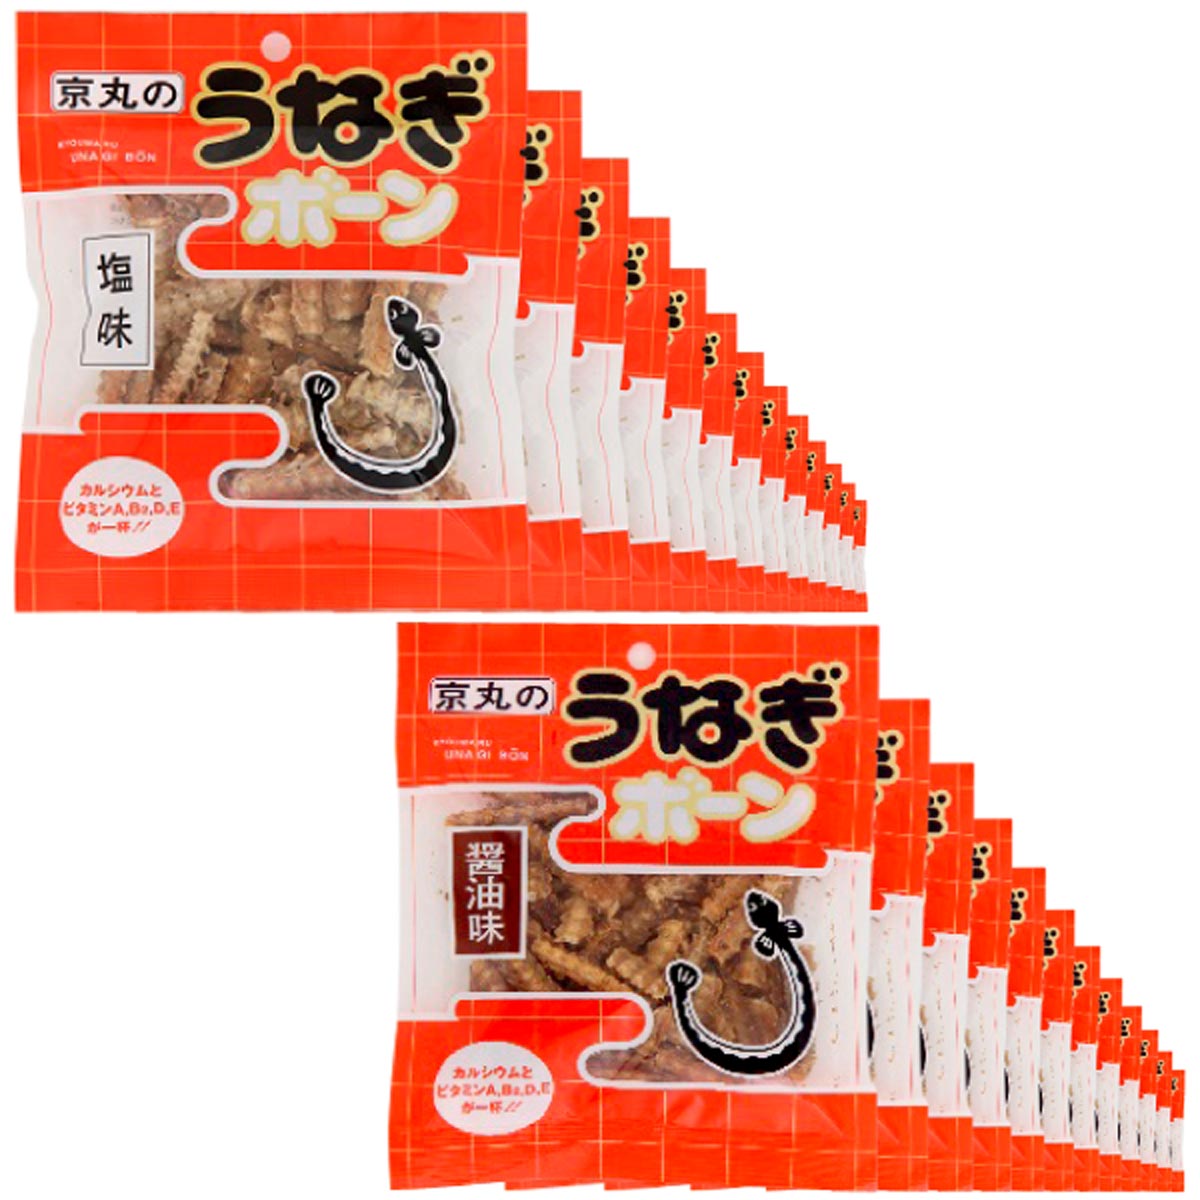 <strong>うなぎ</strong><strong>ボーン</strong> <strong>うなぎ</strong>骨せんべい 塩味26g×13袋+醤油味26g×12袋セット <strong>京丸</strong>【送料無料(関東・関西・中部・北陸・信越のみ)】【ギフト包装不可】ウナギ<strong>ボーン</strong> 【smtb-t】